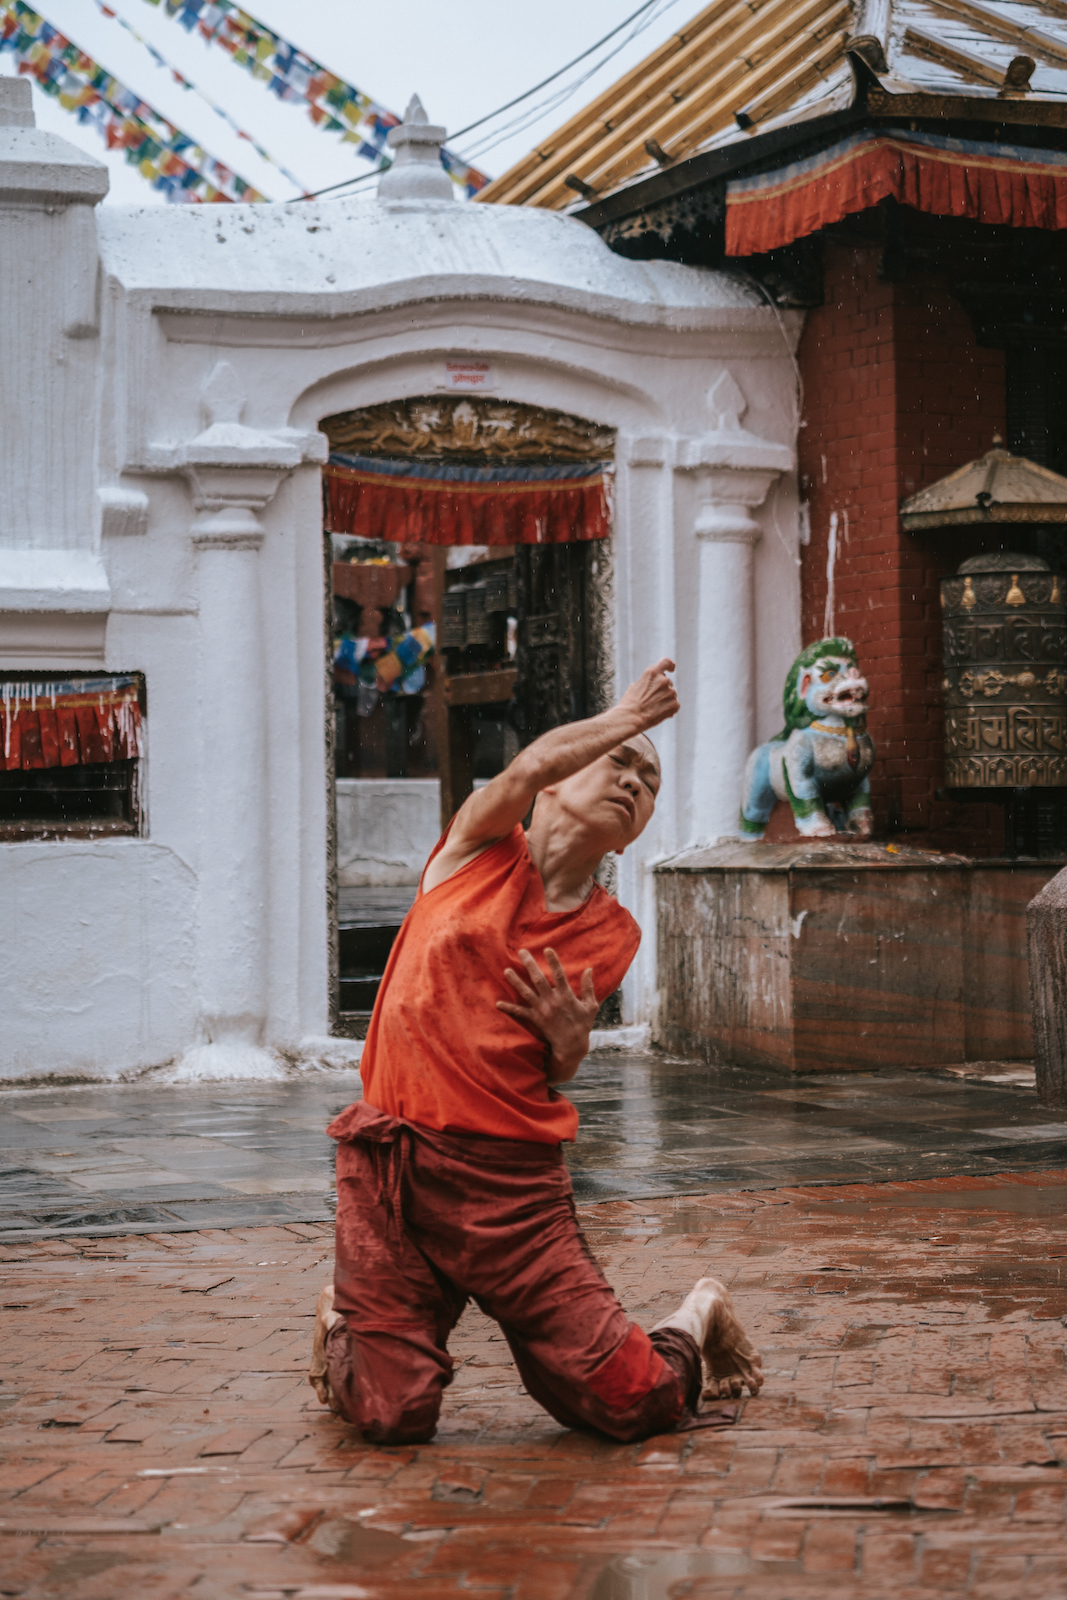 Dance of Rebirth: Ode to Eternity in Nepal | Ferox production